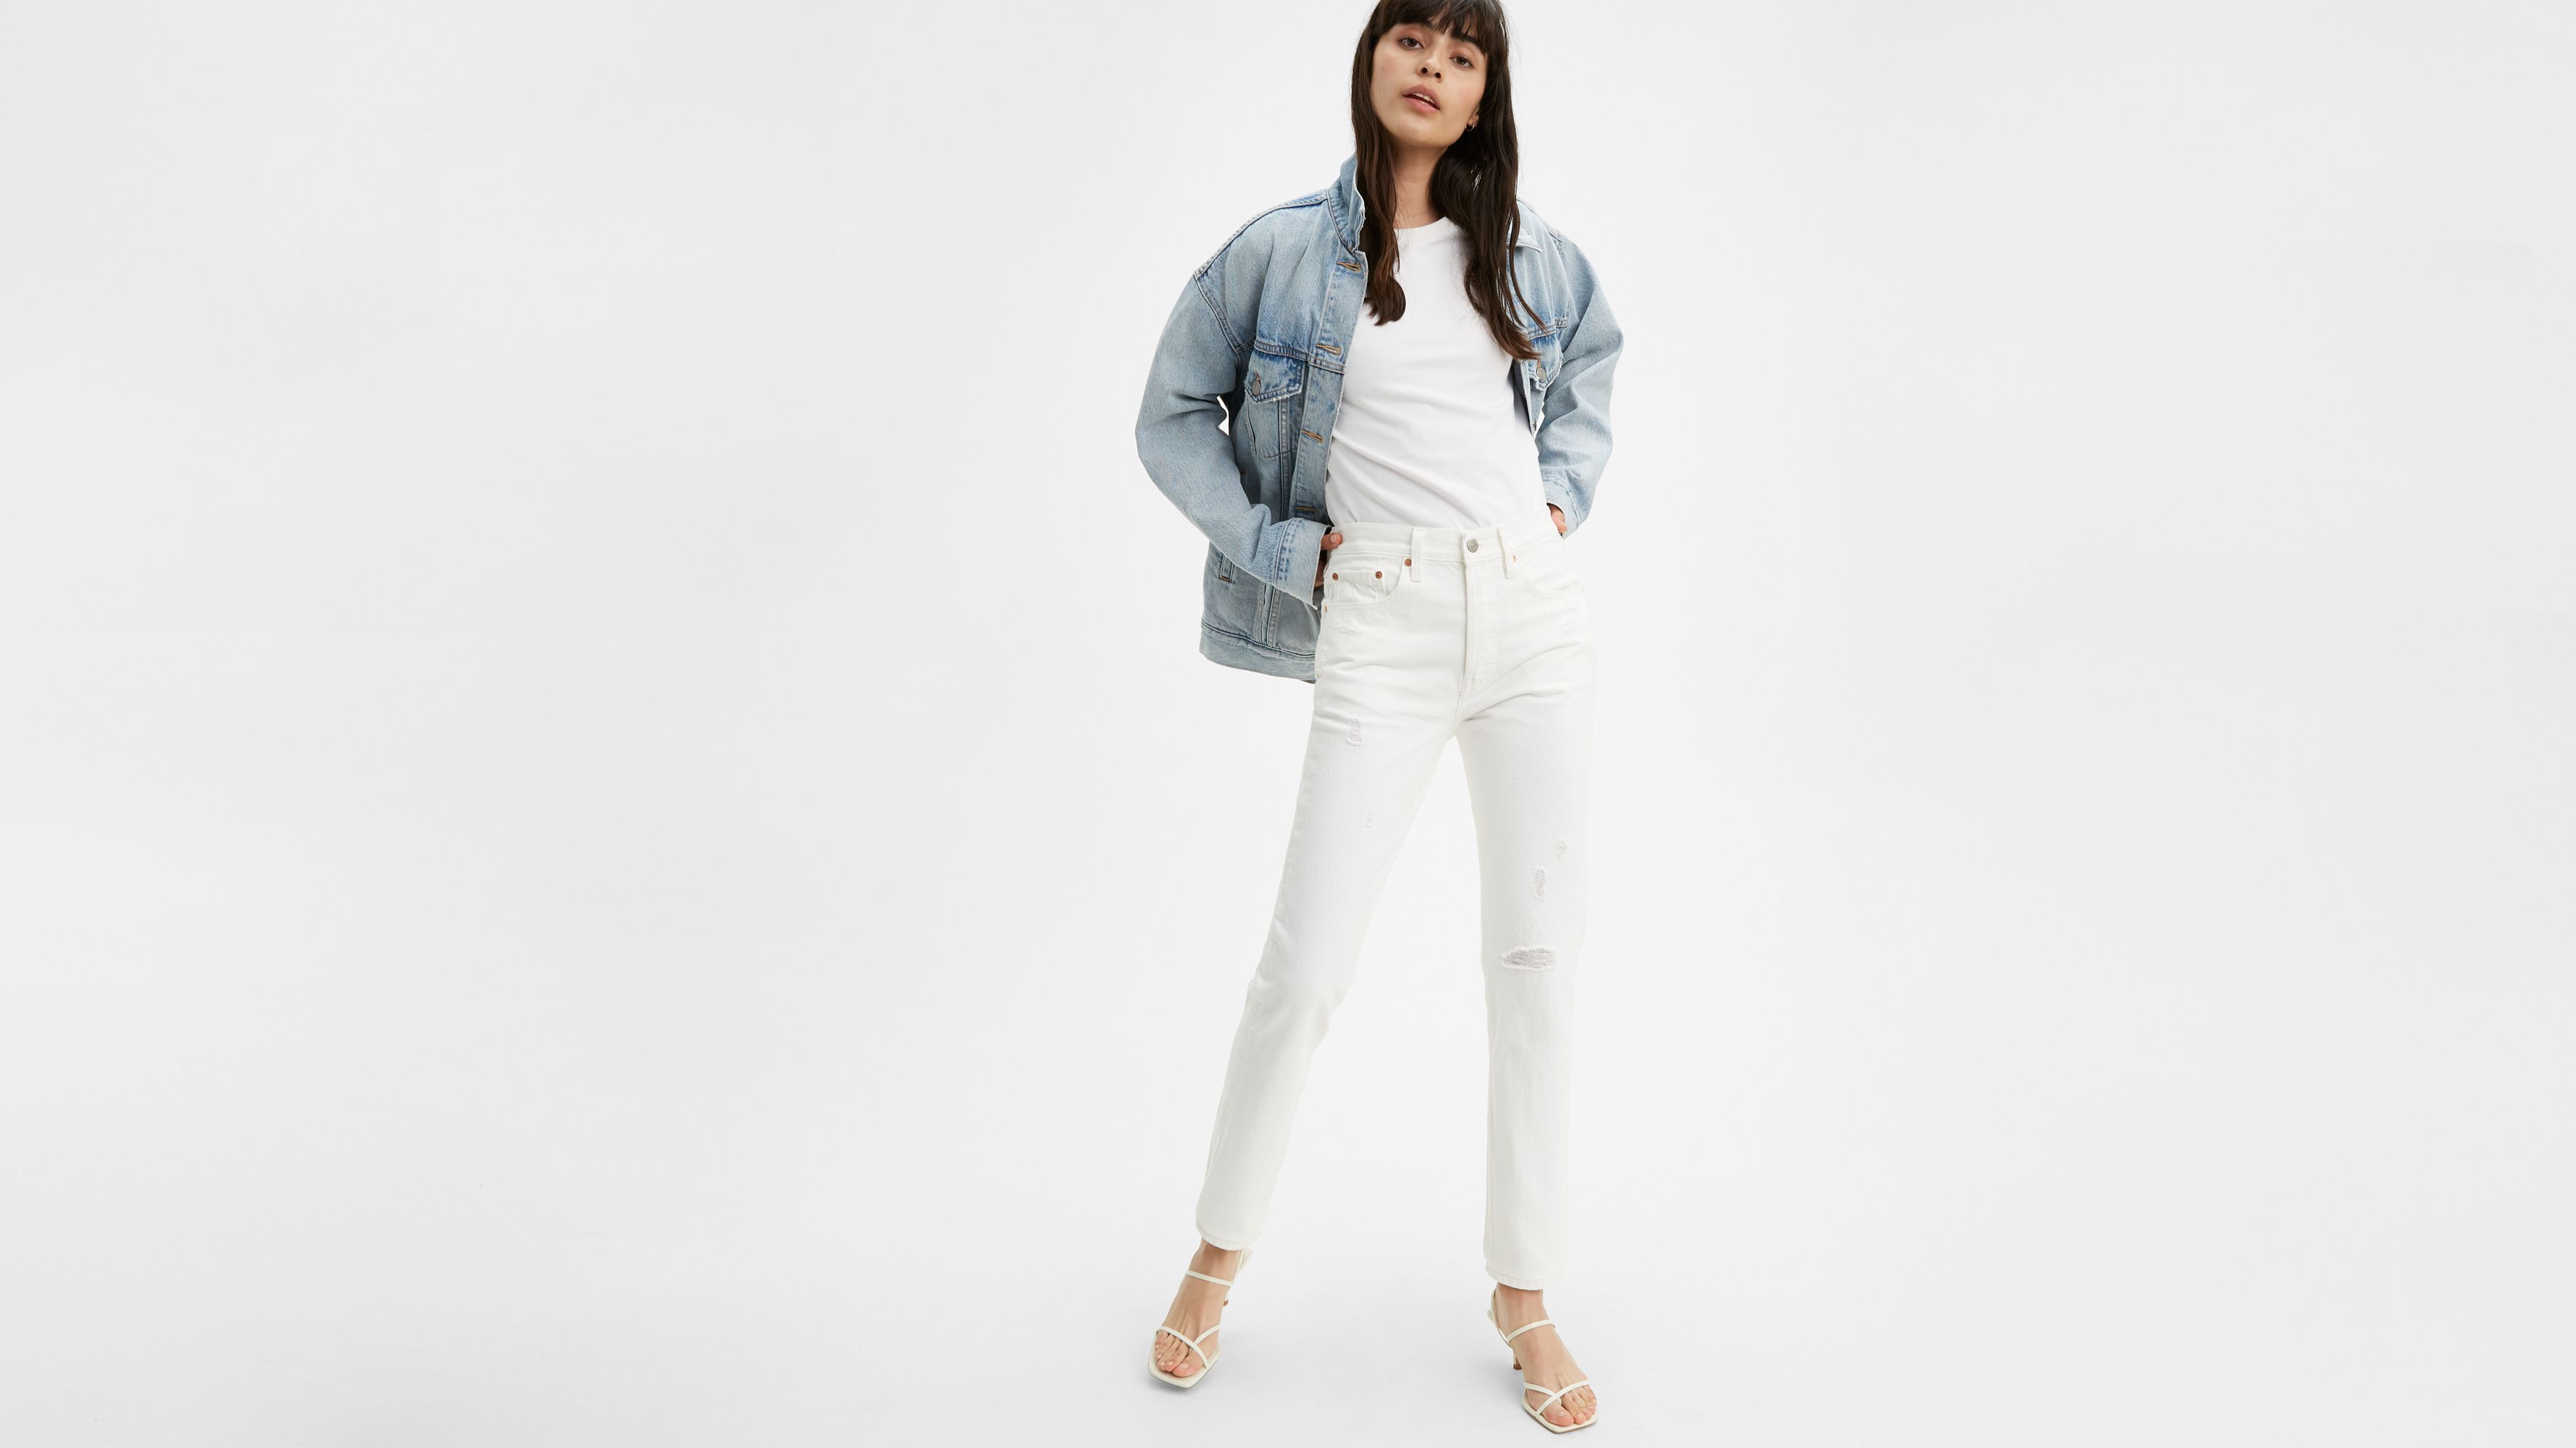 levis white skinny jeans